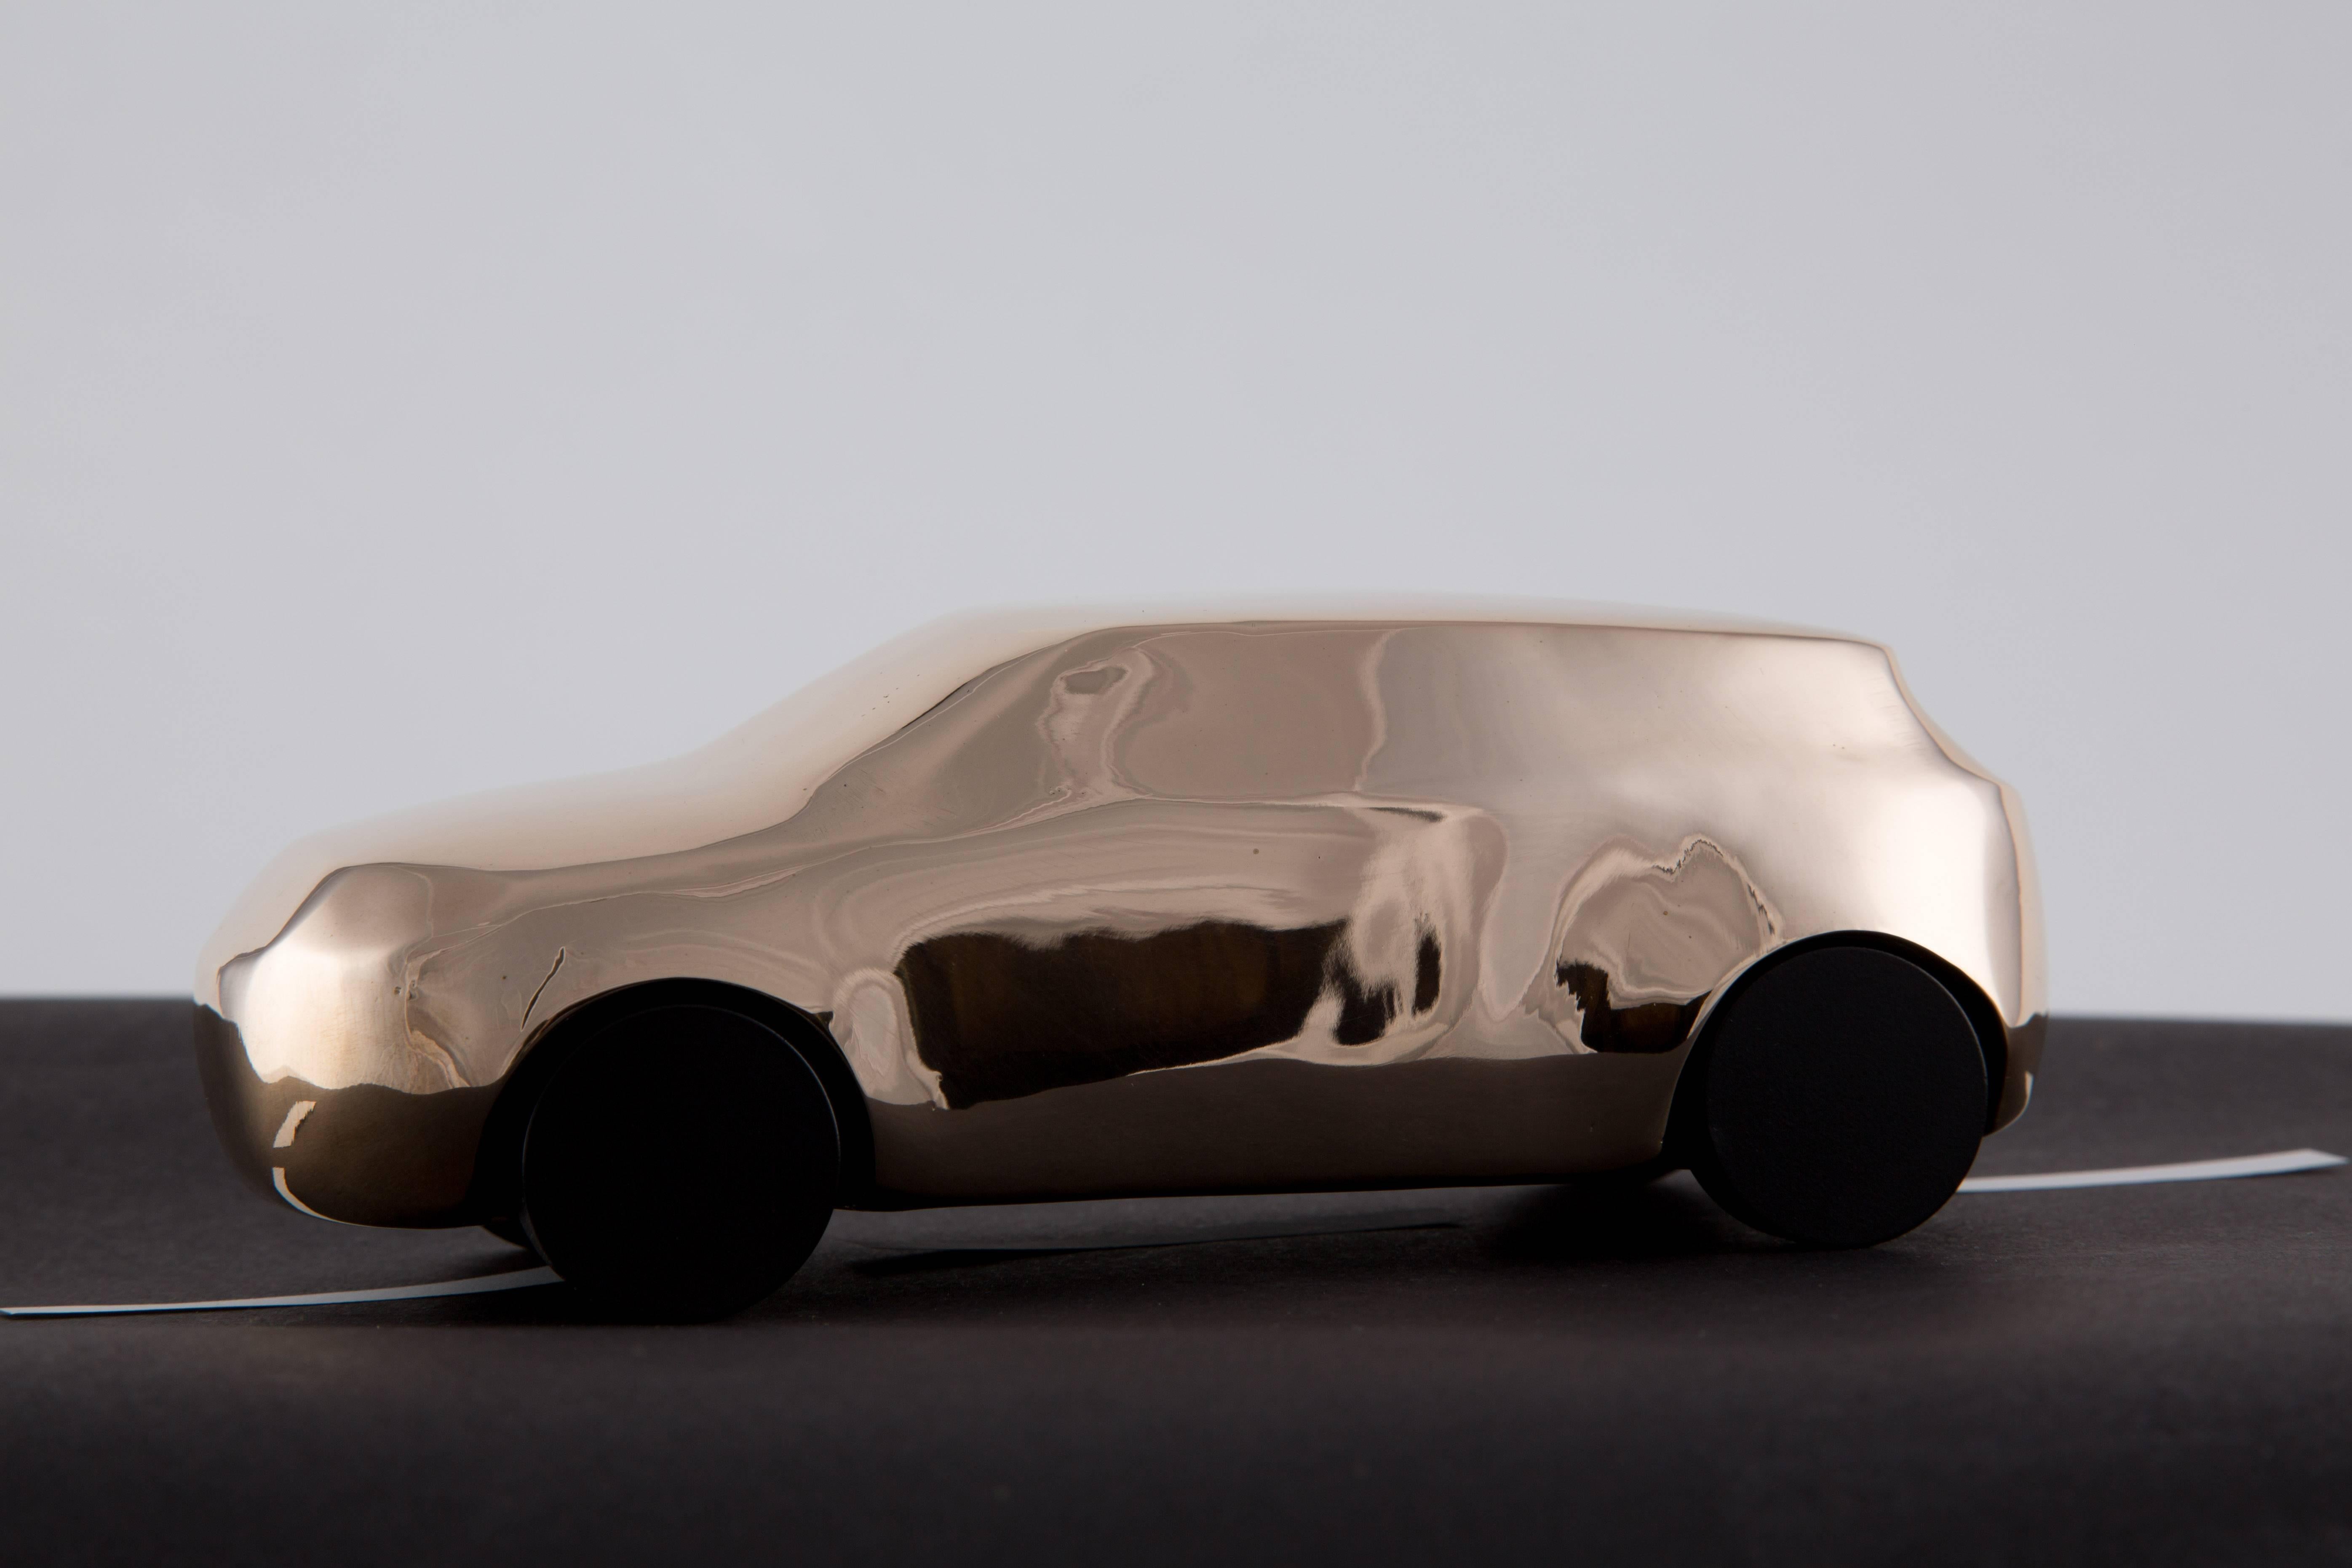 Studio Job made in 2013 this car of bronze for Land Rover. It is called 